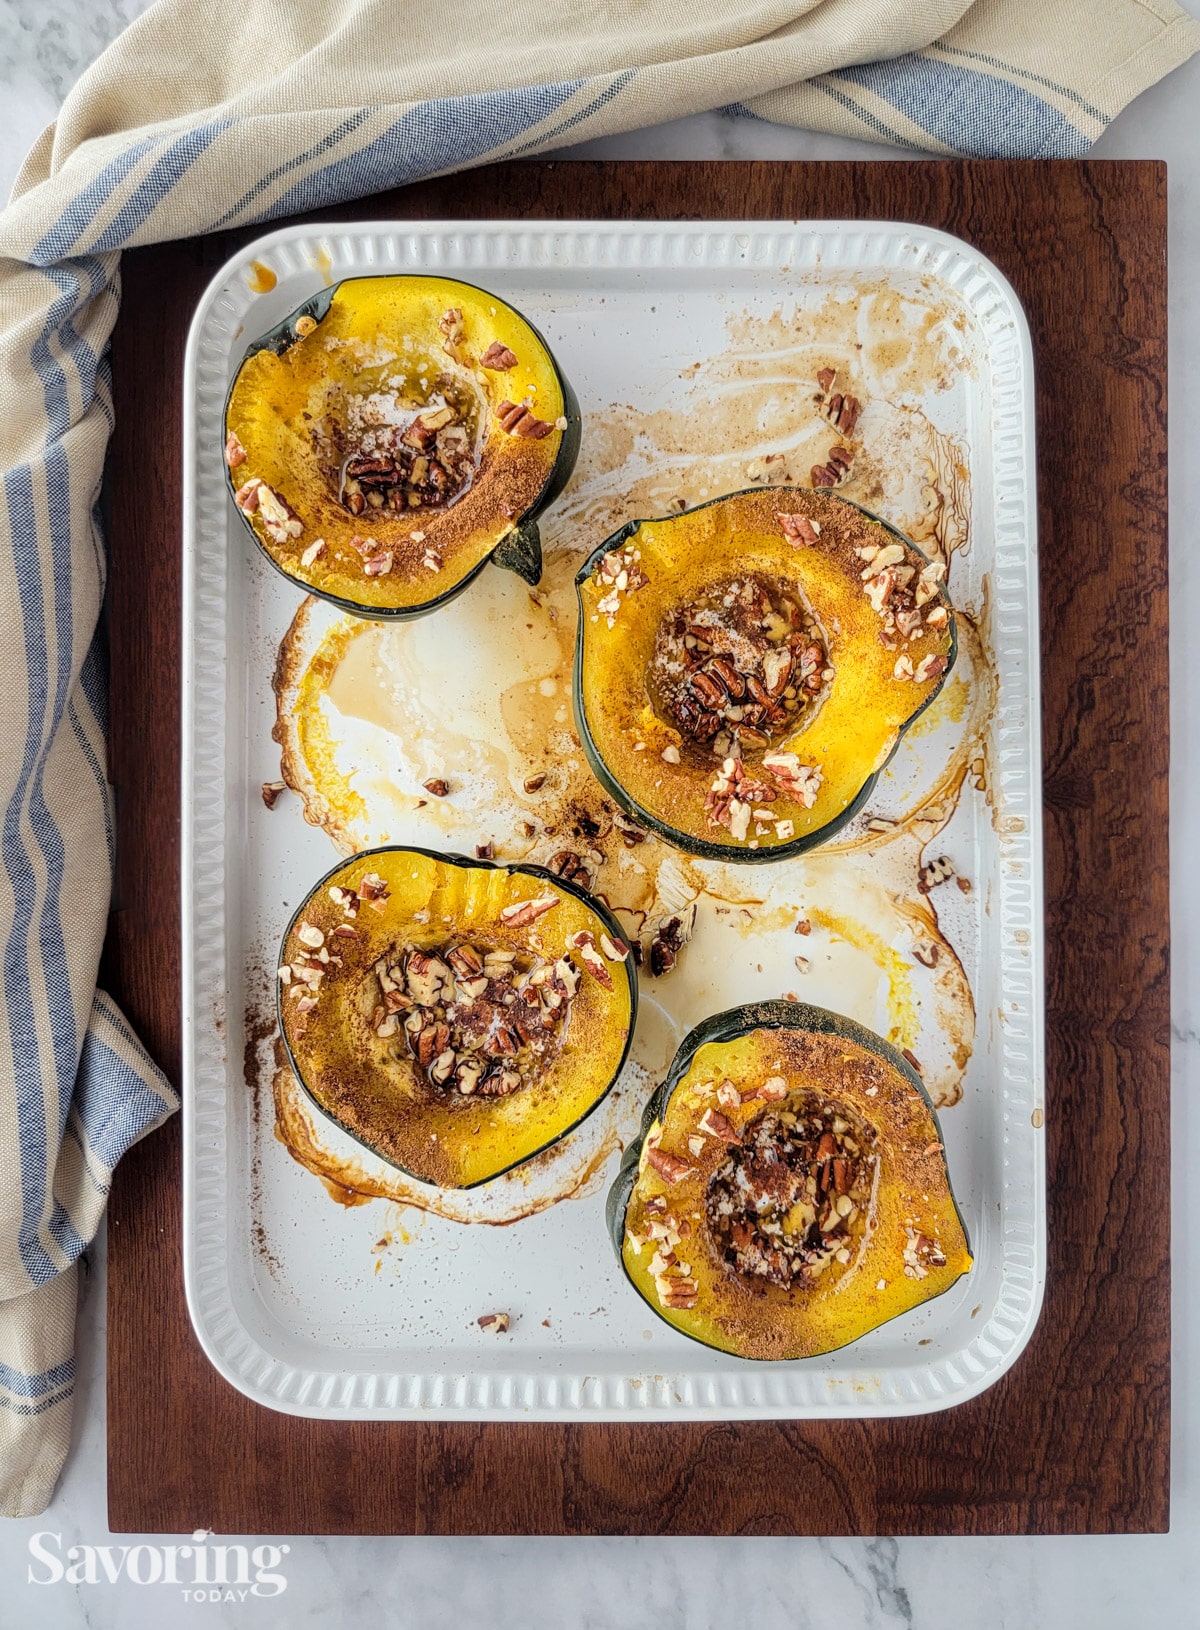 Roasted acorn squash topped with pecans in a baking dish on a cutting board